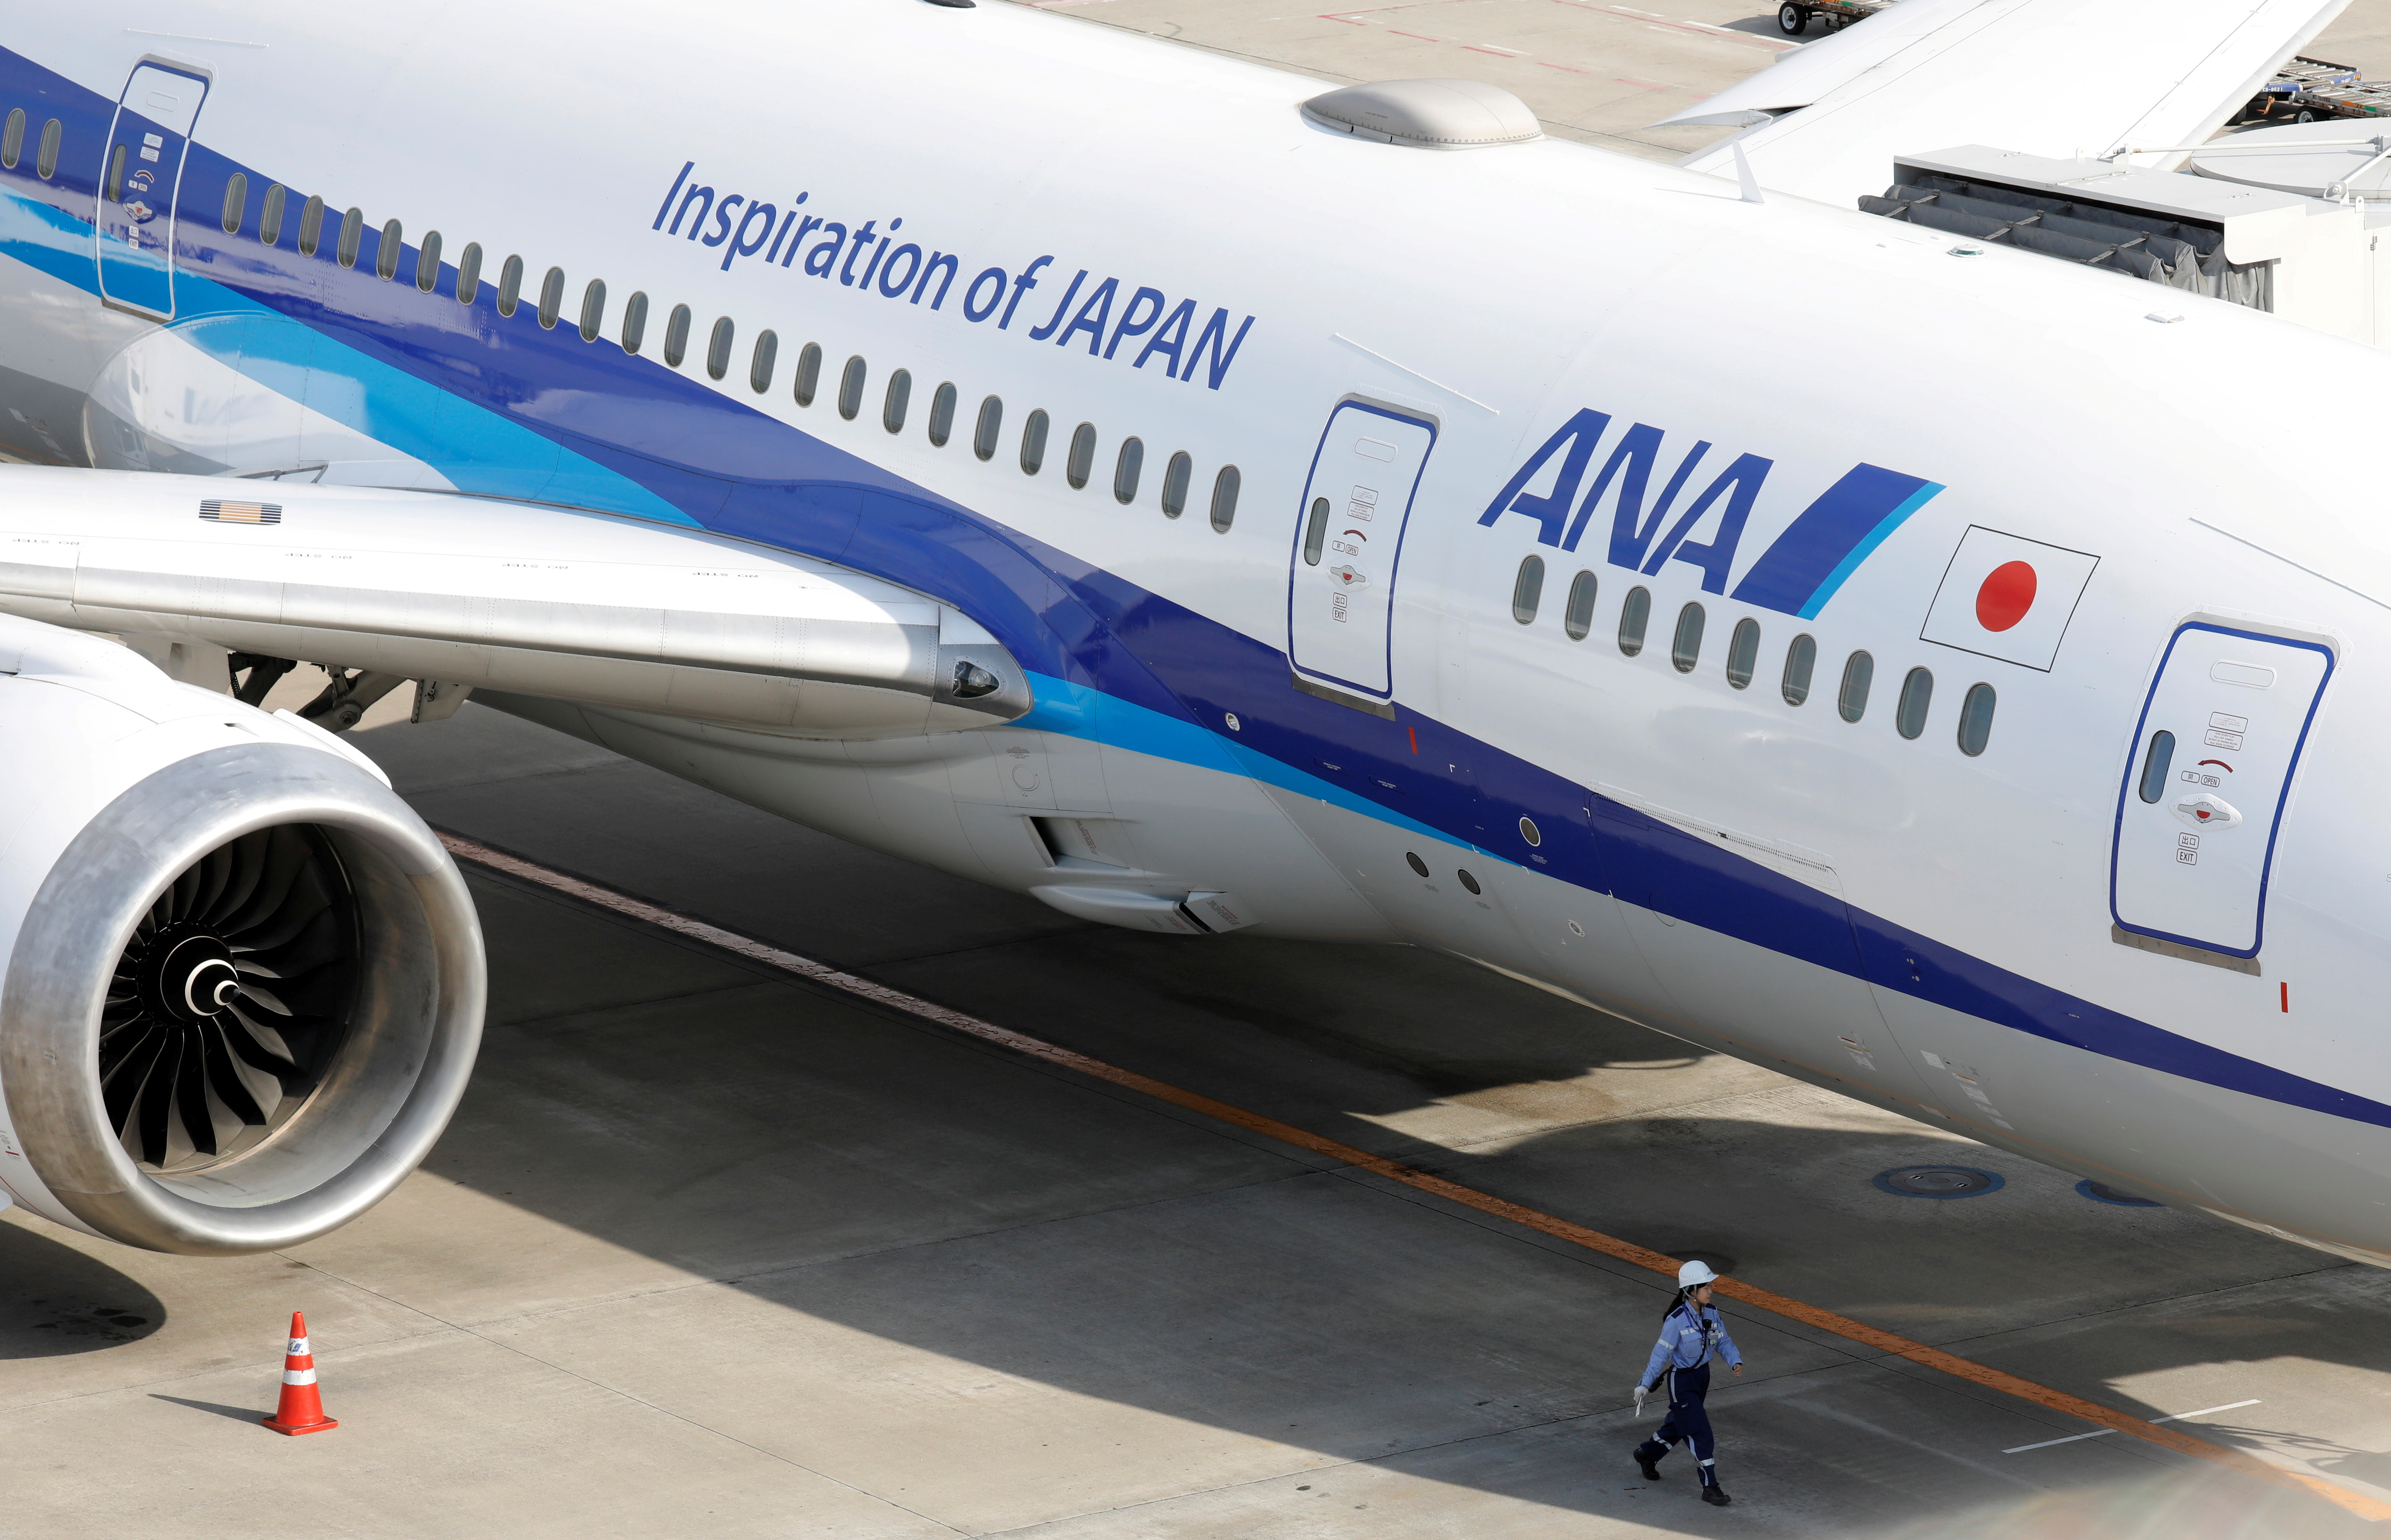 A ground crew member walks next to an All Nippon Airways (ANA) aircraft at Tokyo International Airport